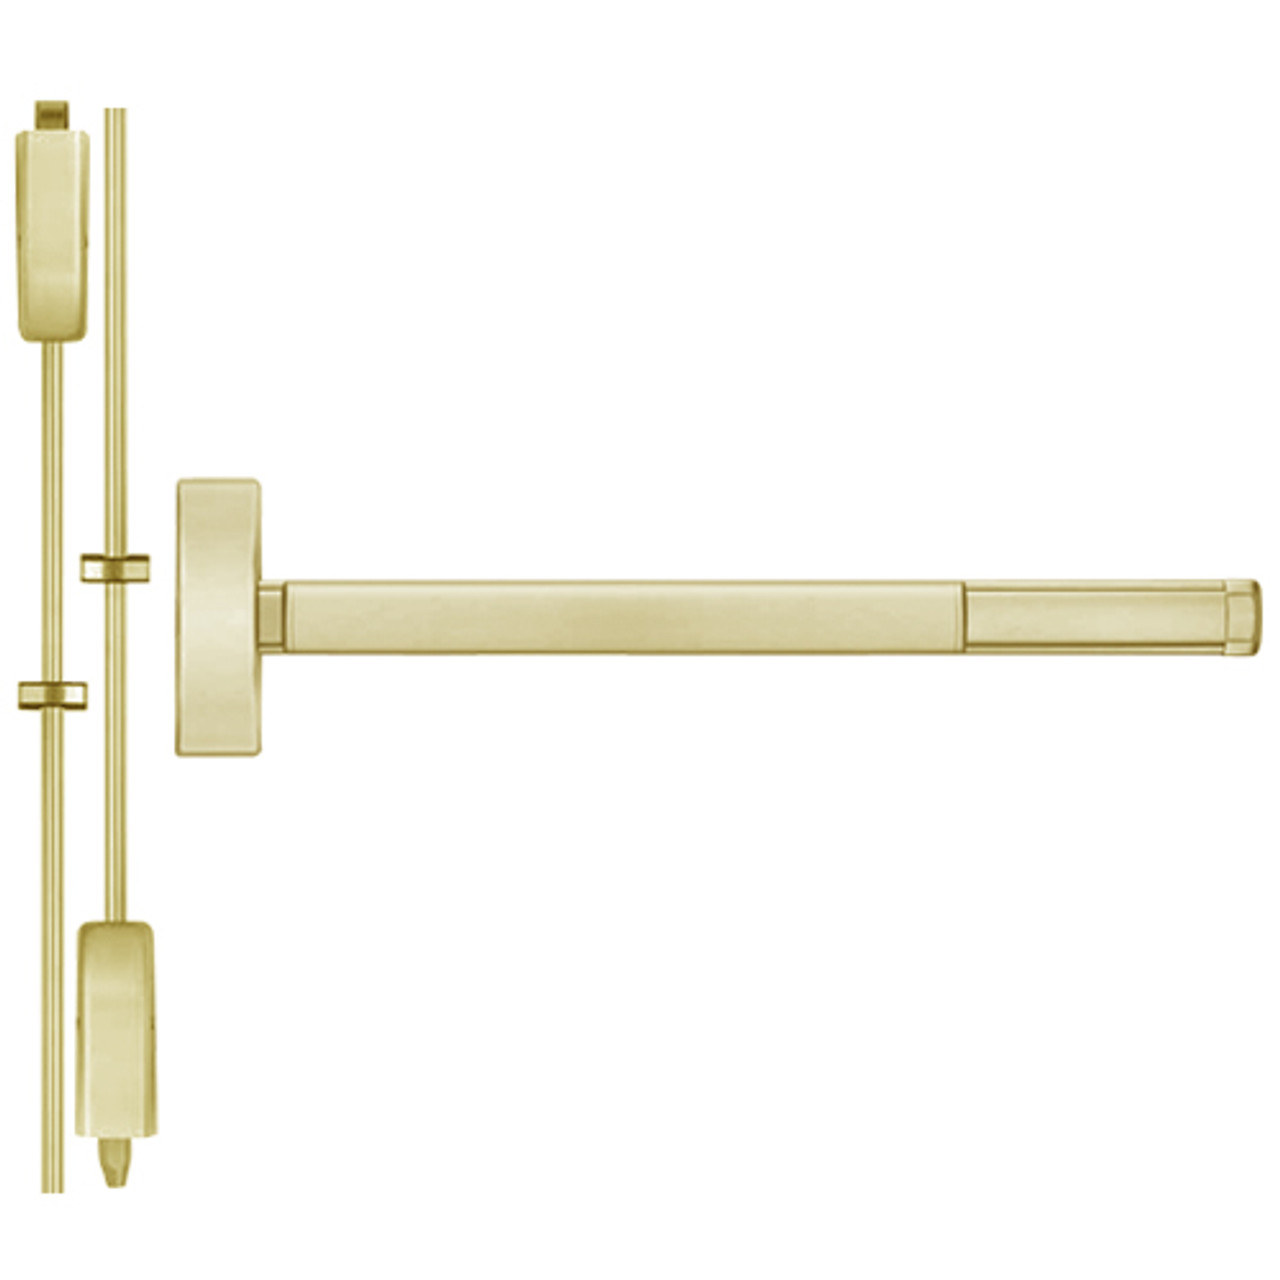 DE2202LBR-606-48 PHI 2200 Series Non Fire Rated Apex Surface Vertical Rod Device with Delayed Egress Prepped for Dummy Trim in Satin Brass Finish